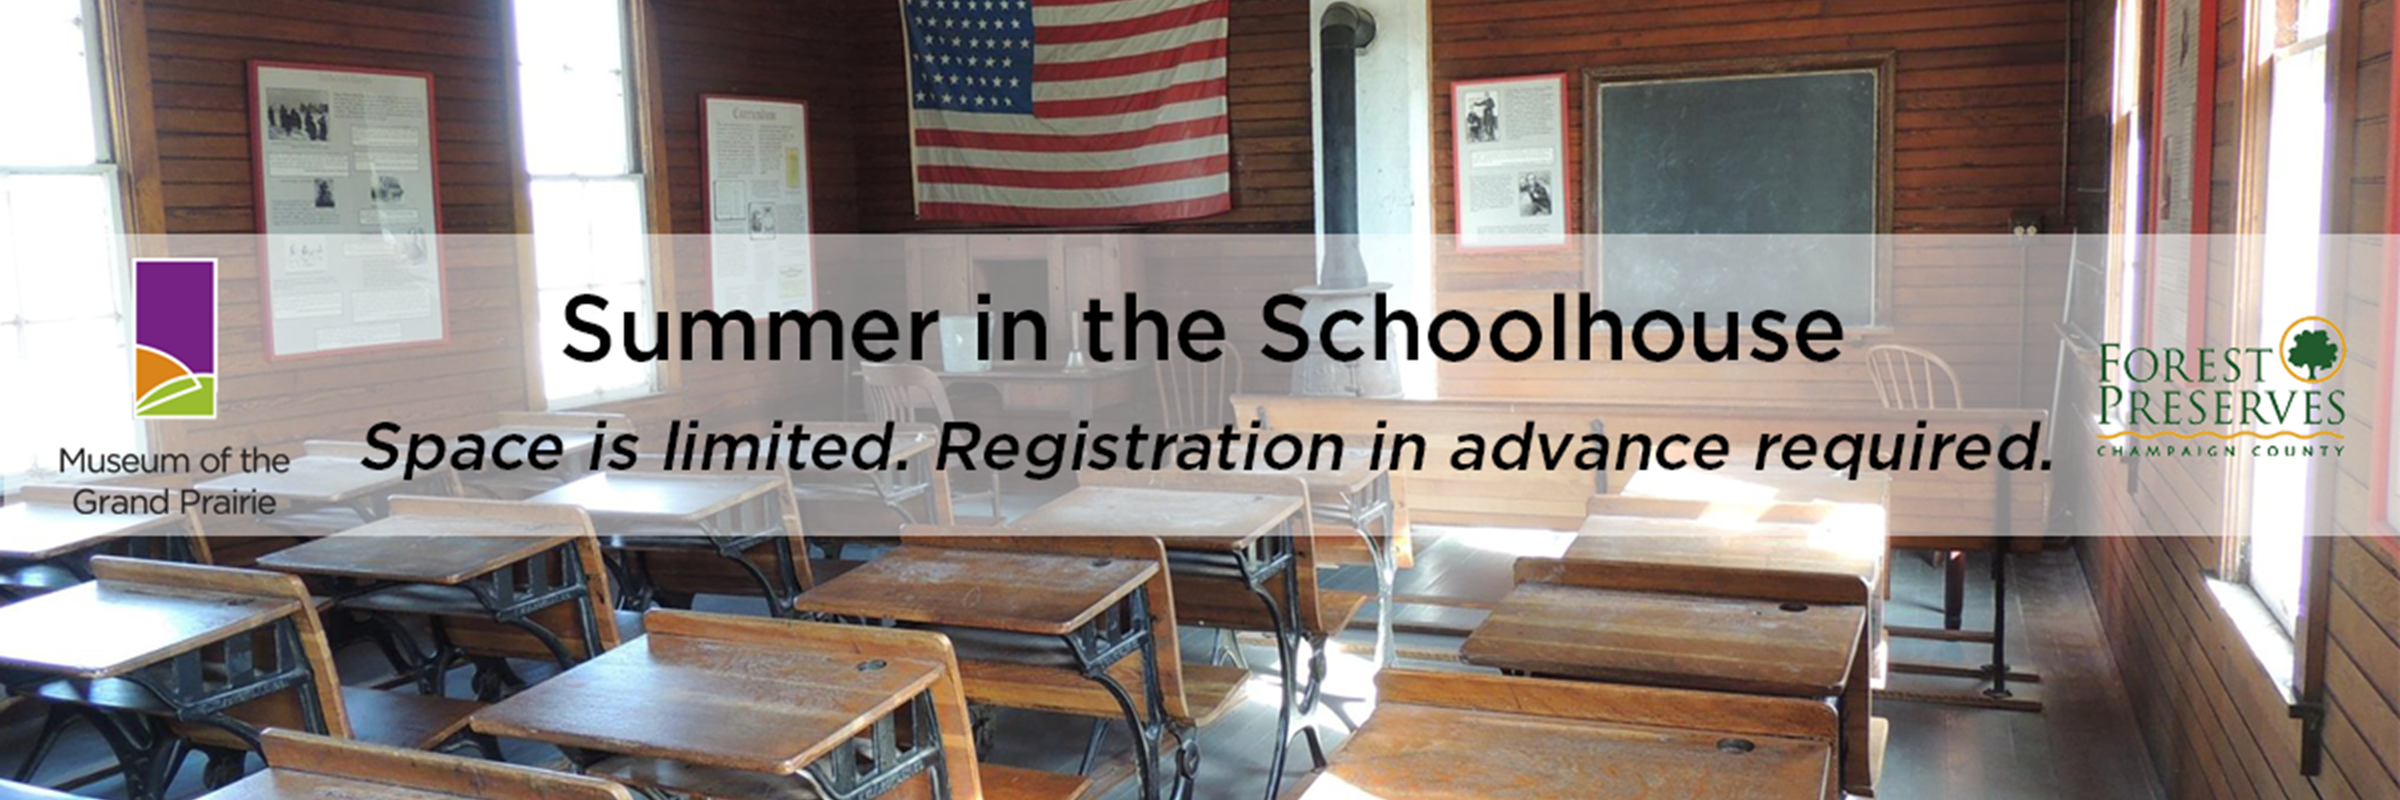 Summer in the Schoolhouse